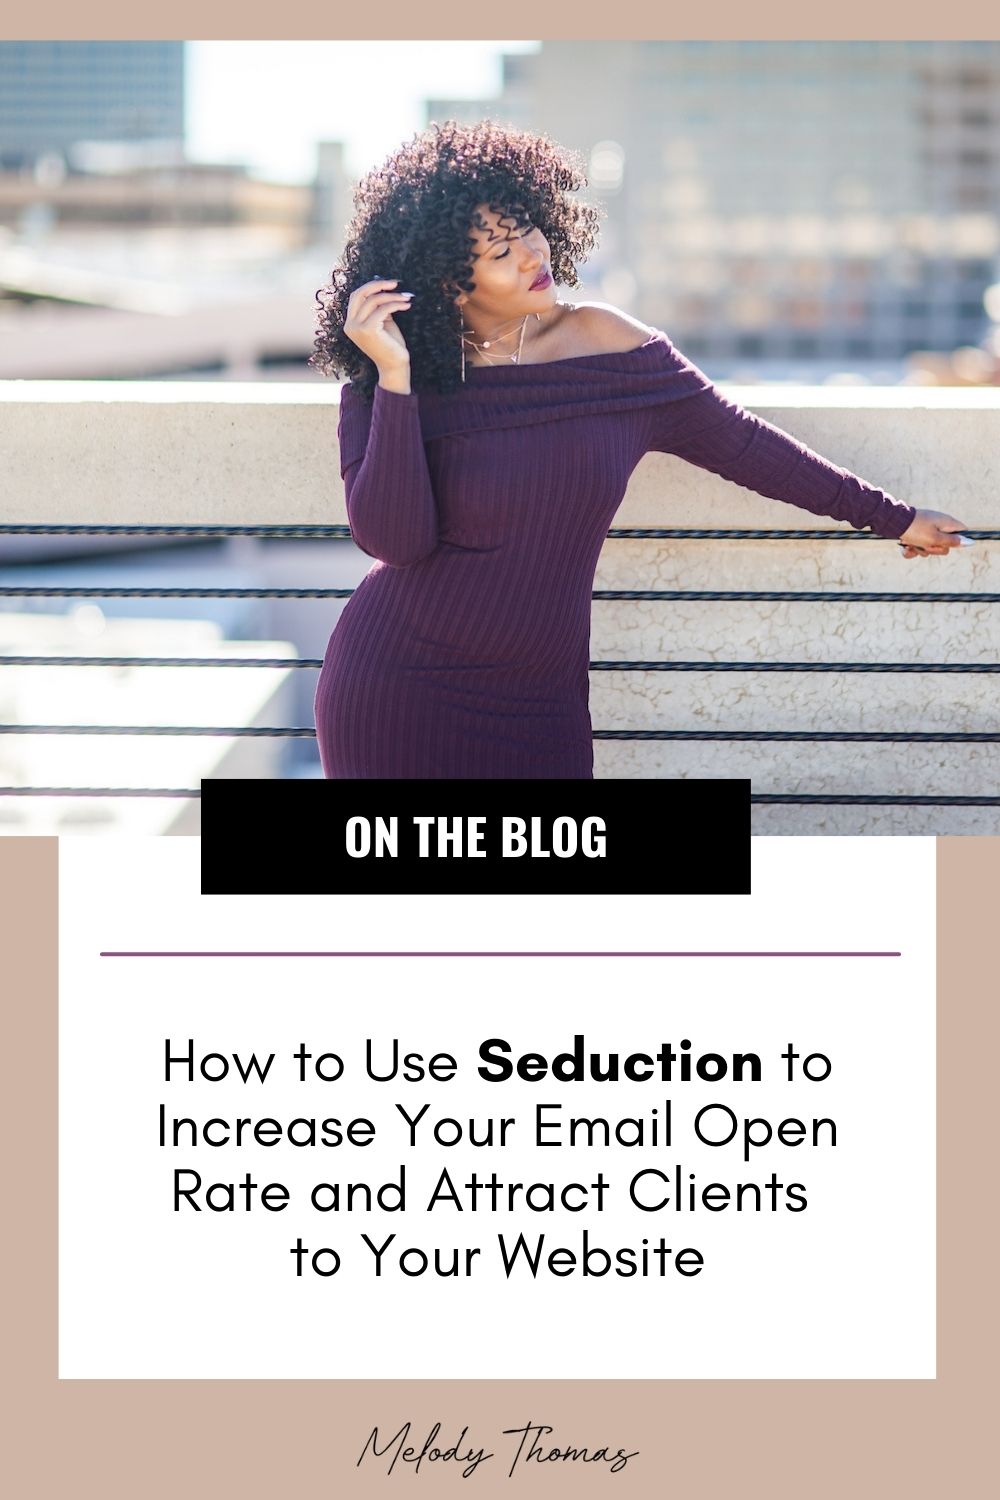 How to Use Seduction to Increase Your Email Open Rate and Attract Clients to Your Website